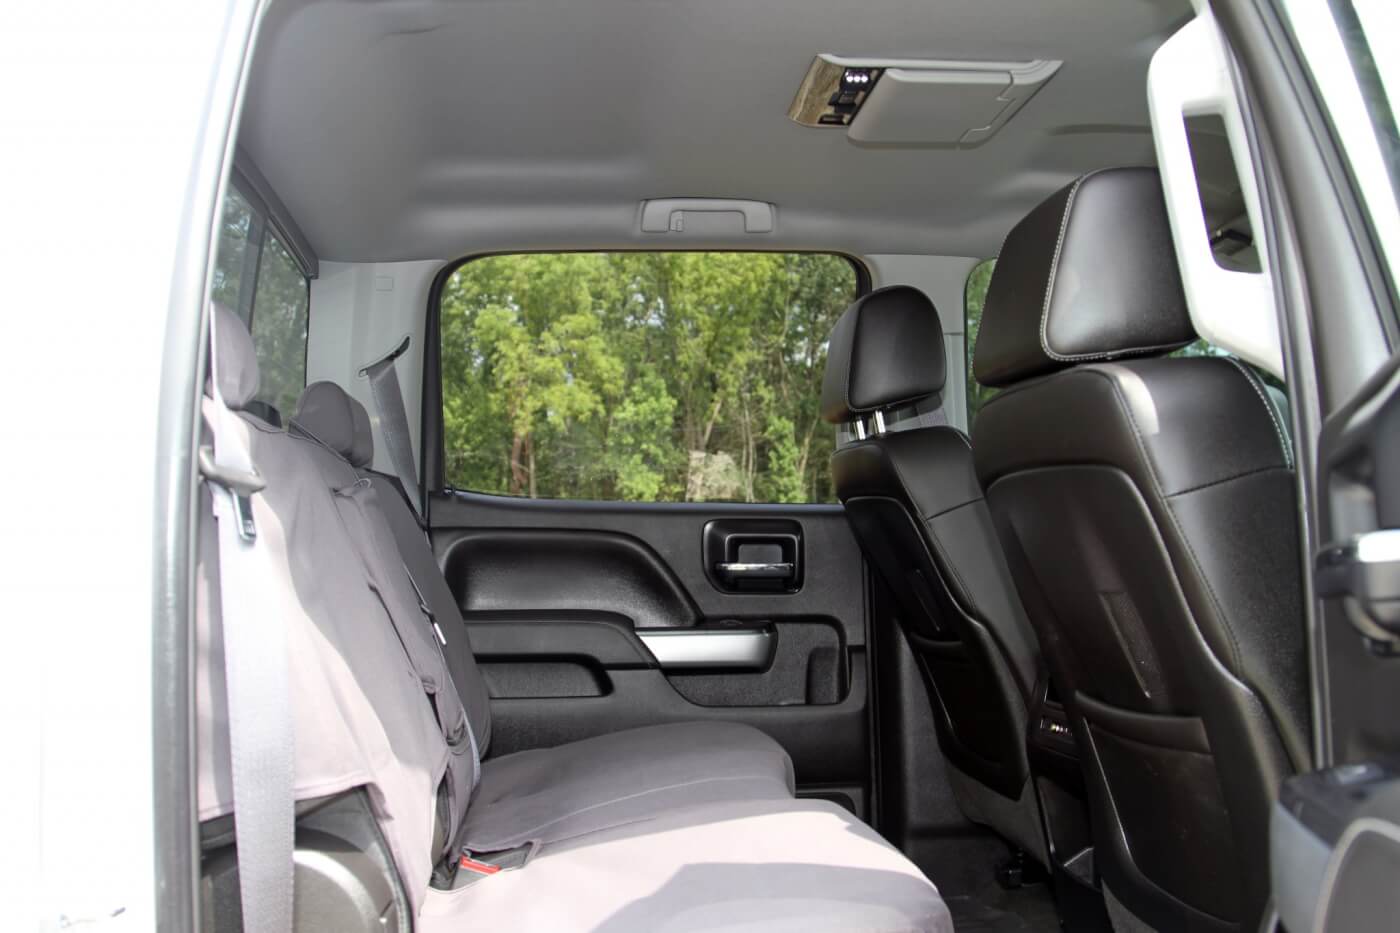 The all-new 2015 Silverado provides a spacious and comfortable interior, complete with a drop-down video screen. Randall decided to keep it close to stock, with a Covercraft rear seat cover and WeatherTech floor mats providing extra protection.